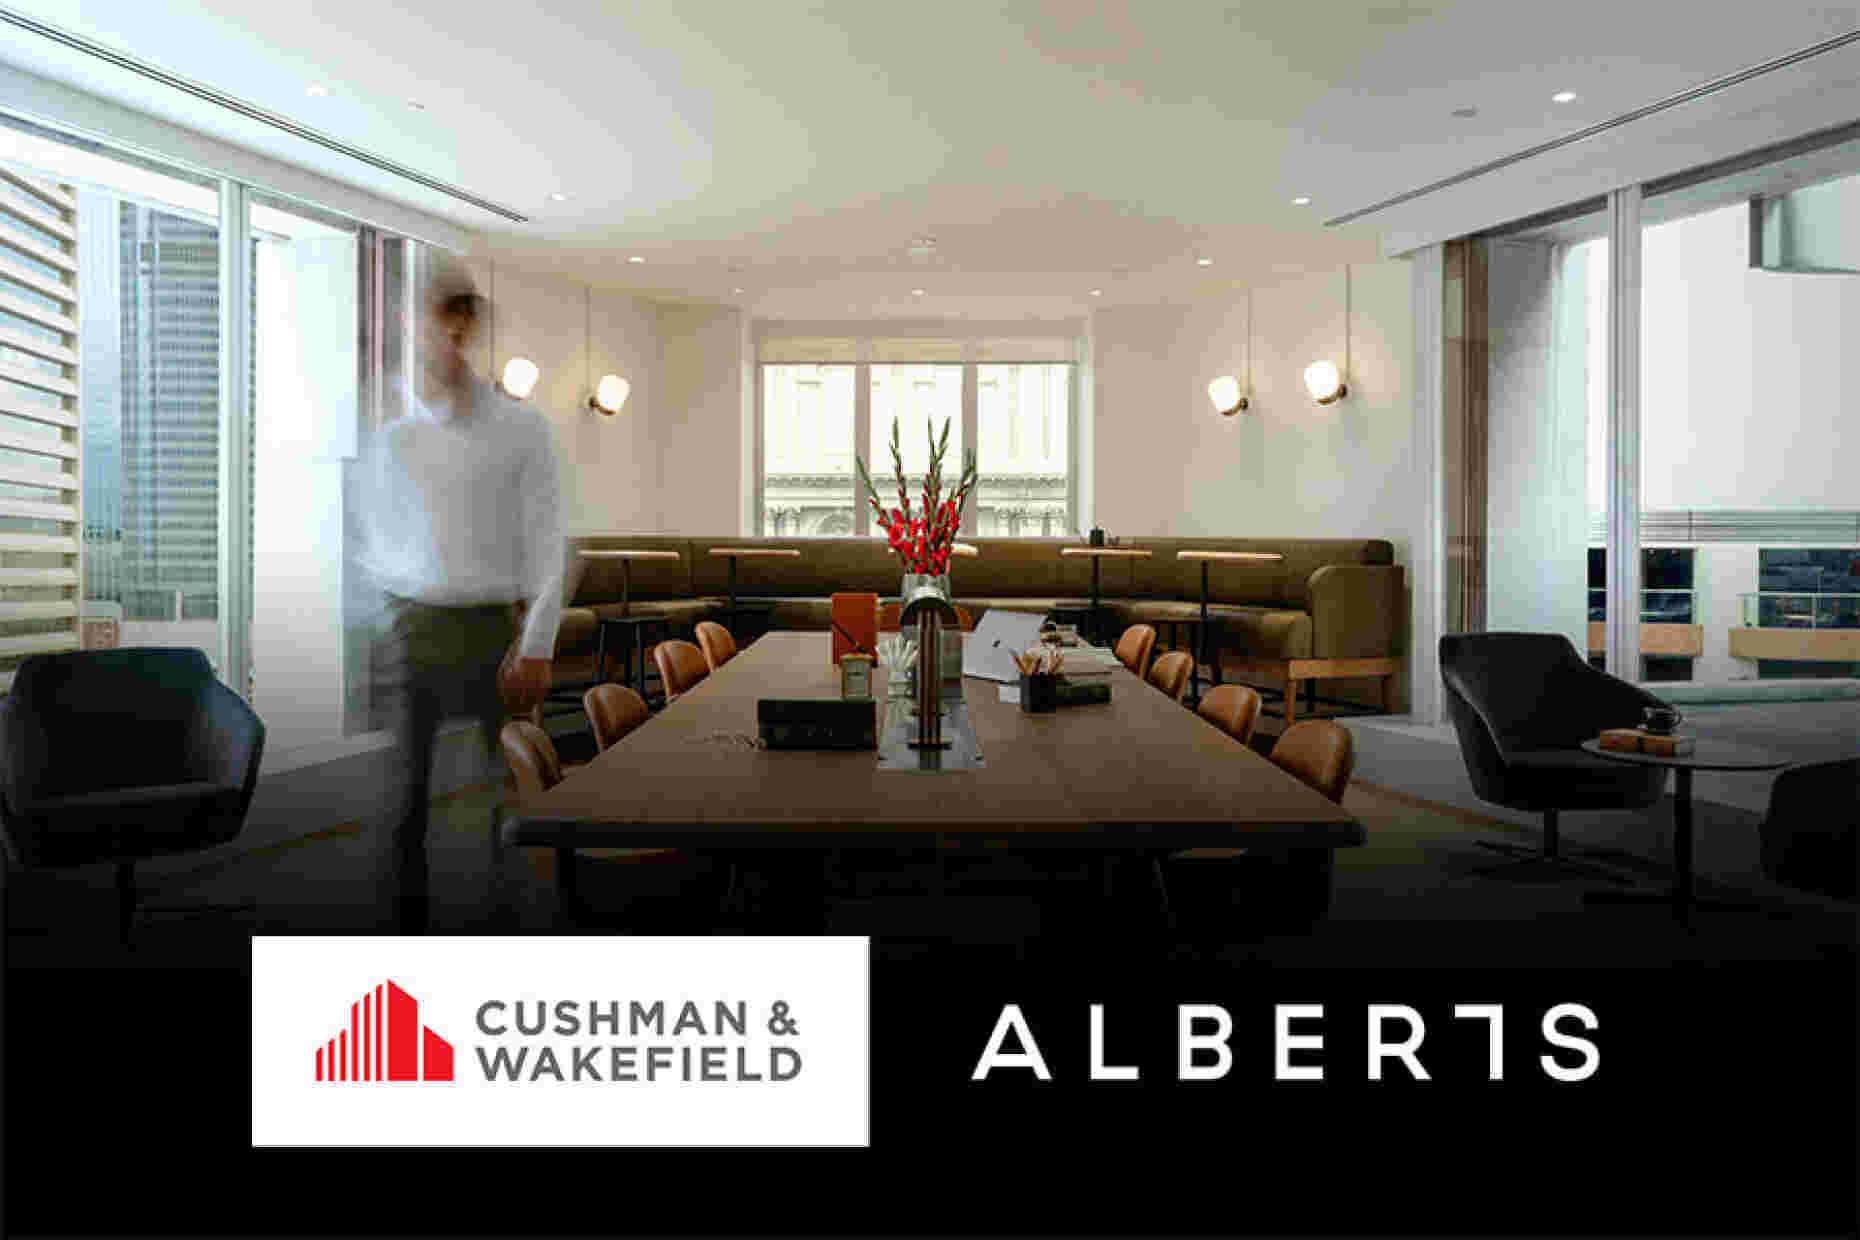 Cushman & Wakefield and Alberts – Where Commerce Meets Common Sense - Talk and Tour